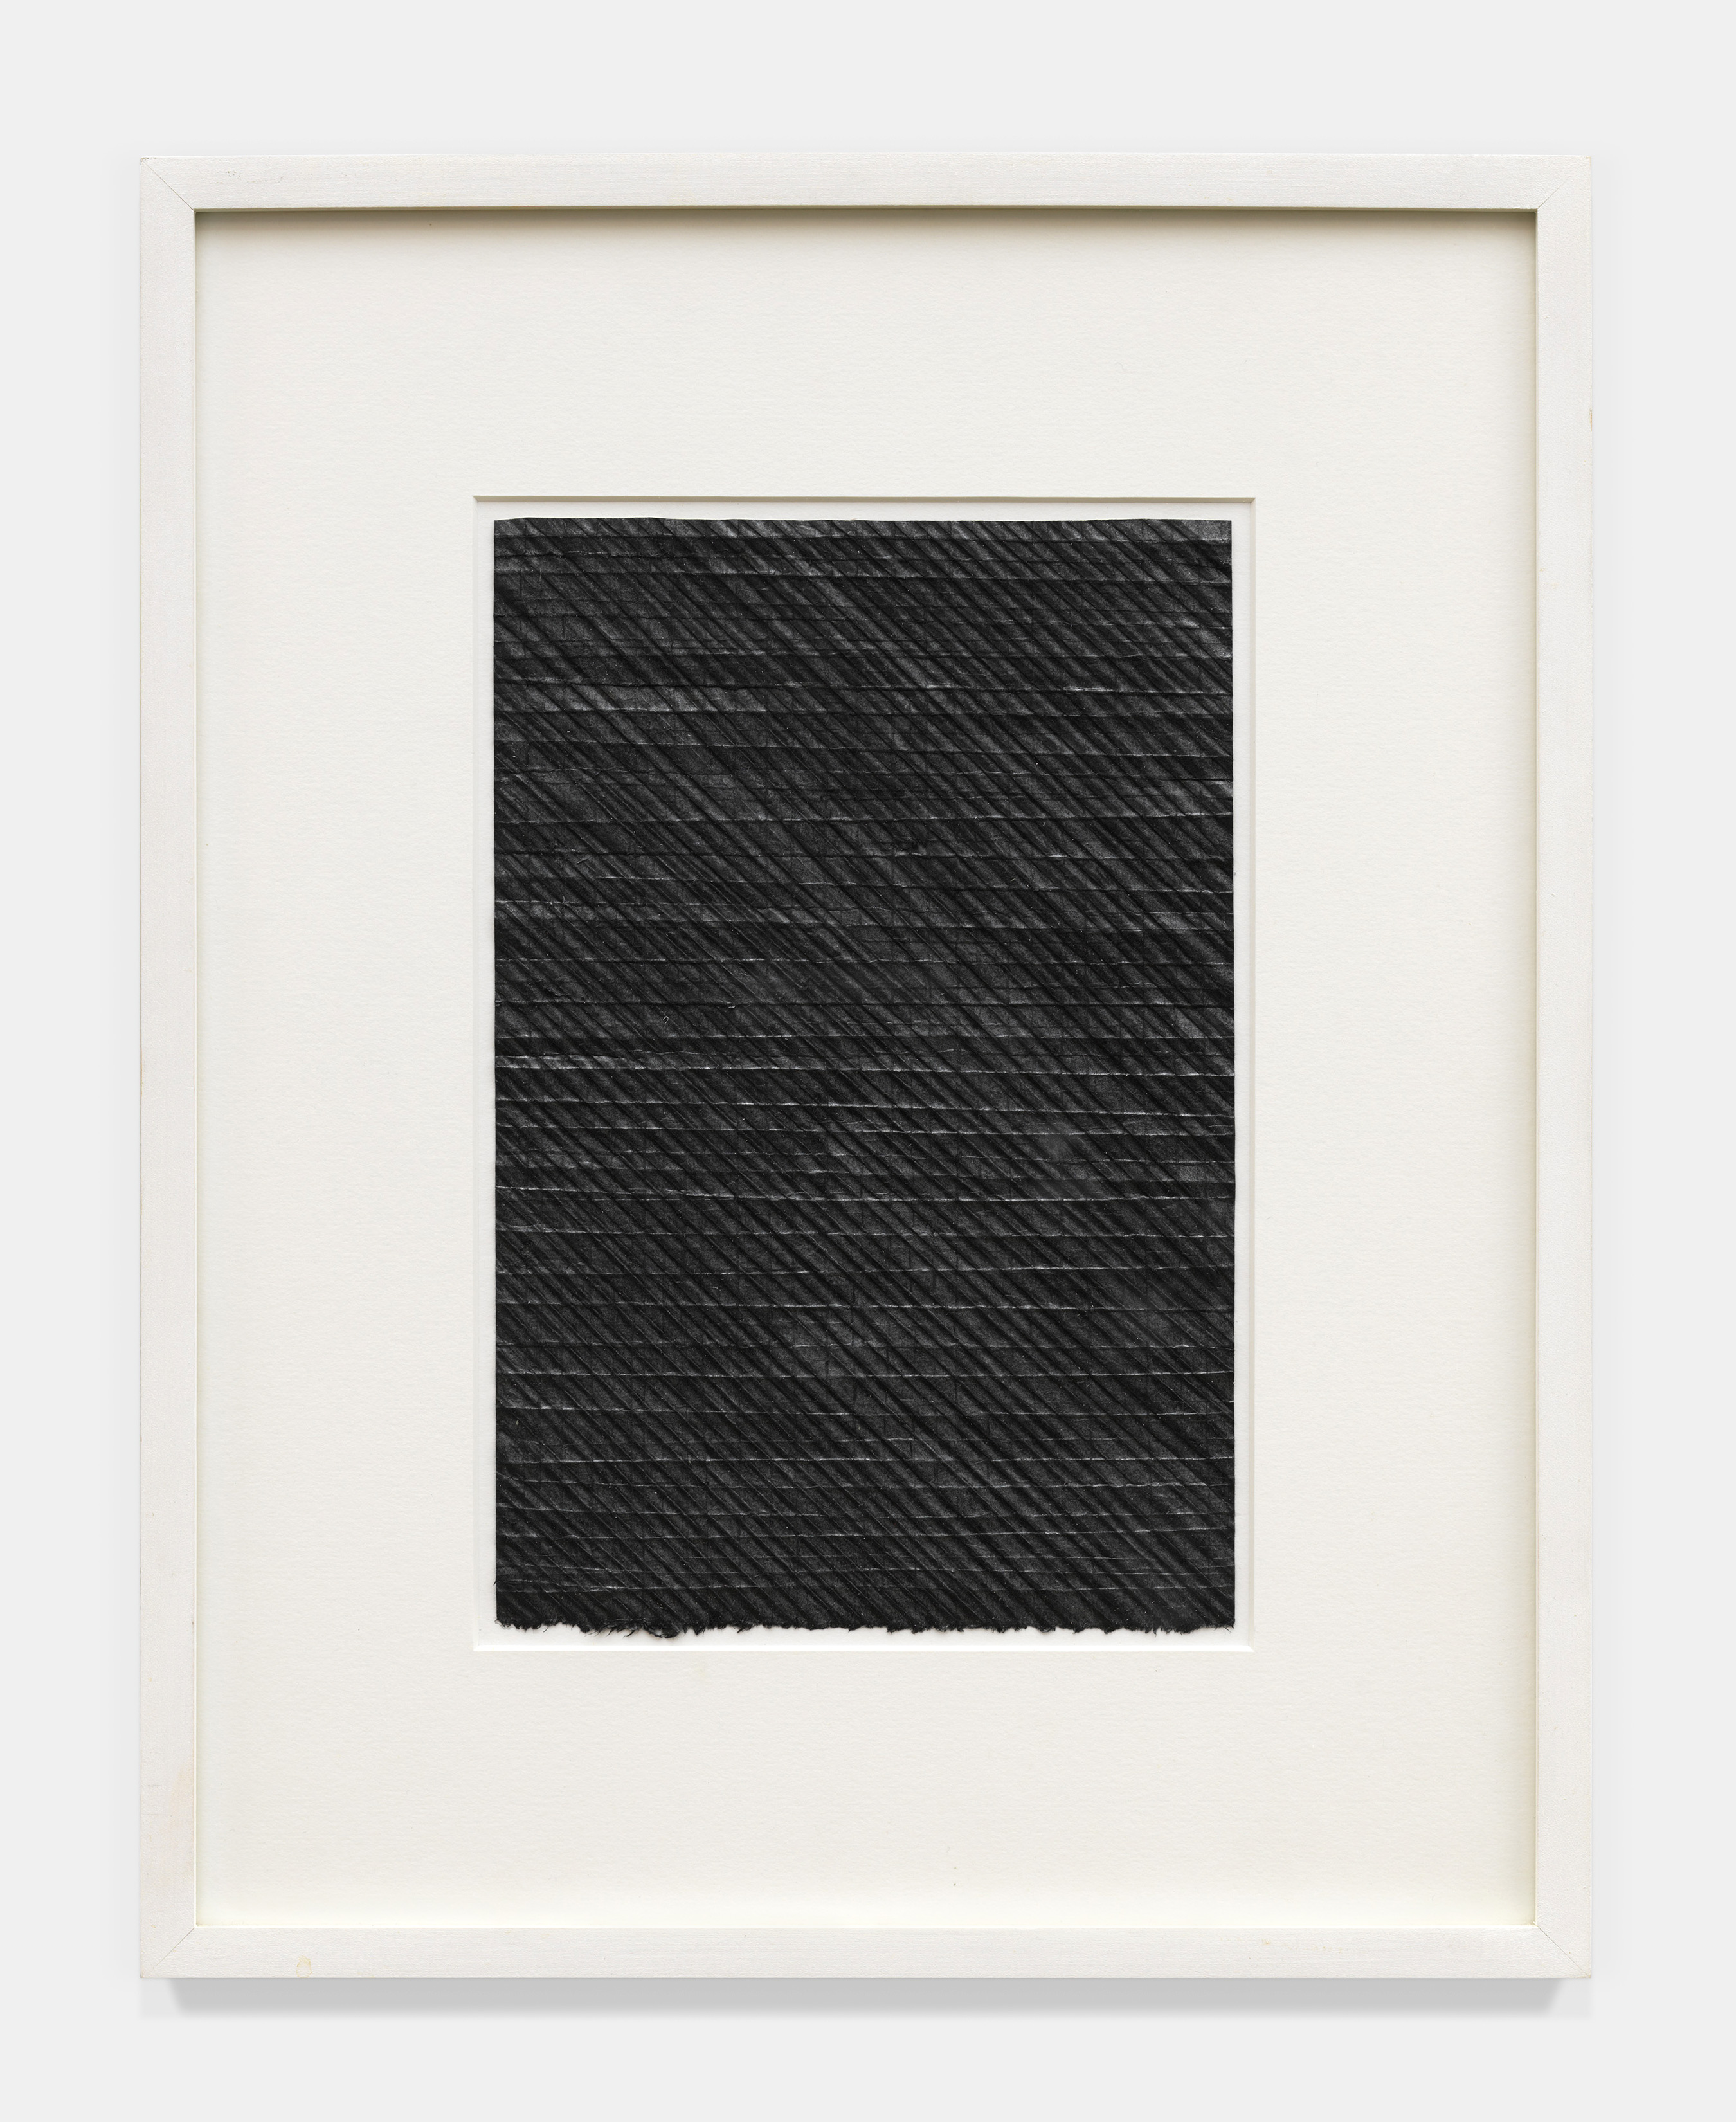 Eleanore Mikus's Untitled graphite and ink on folded nacre paper work framed